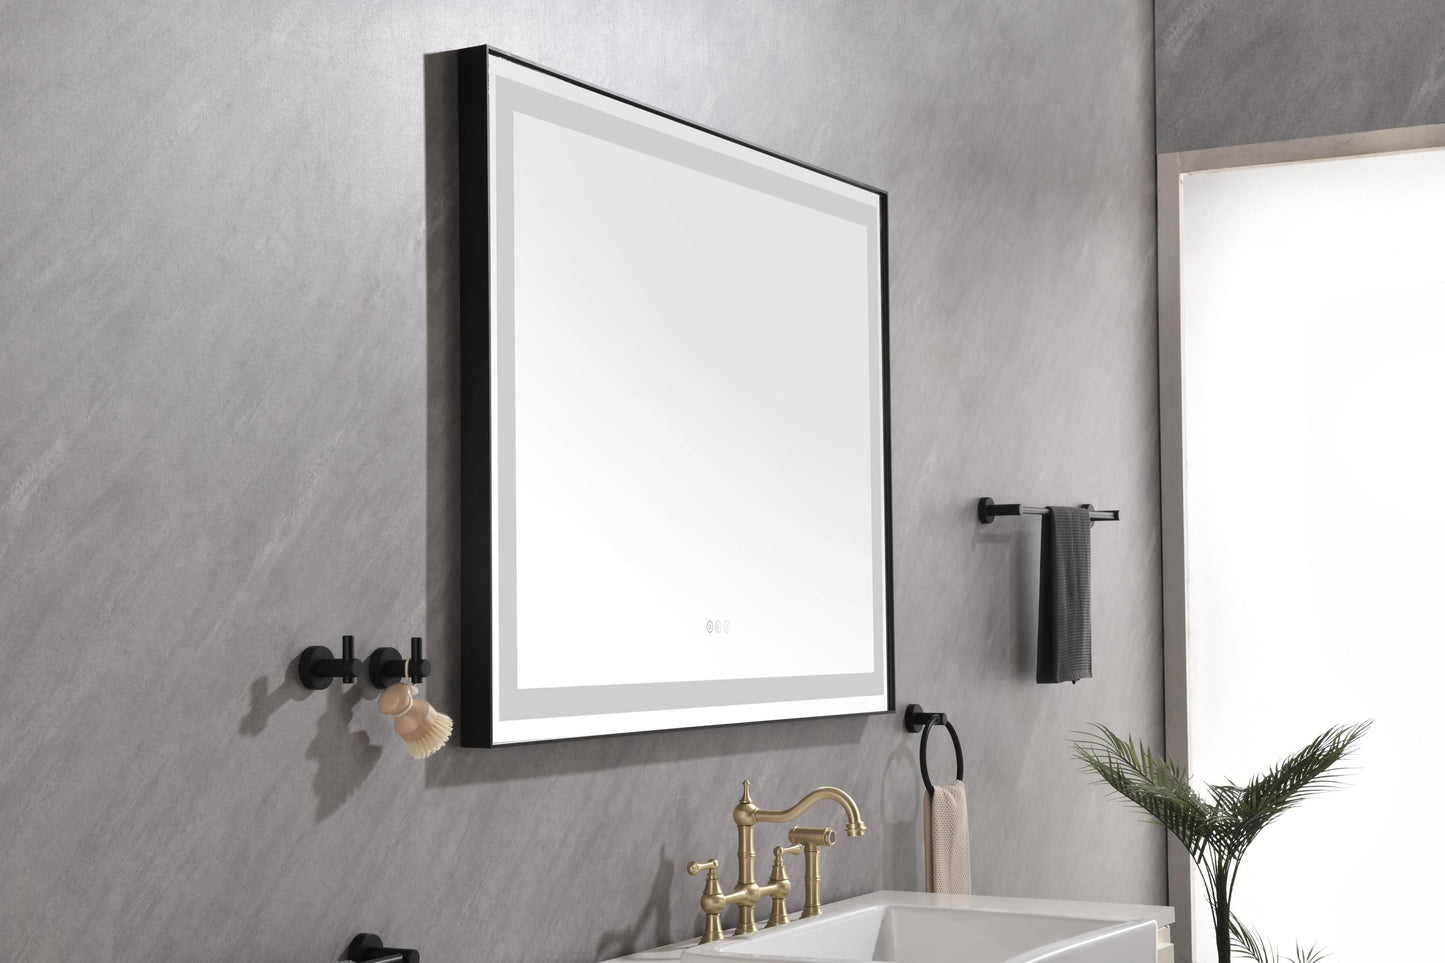 48*36 LED Lighted Bathroom Wall Mounted Mirror with High Lumen+Anti-Fog Separately Control